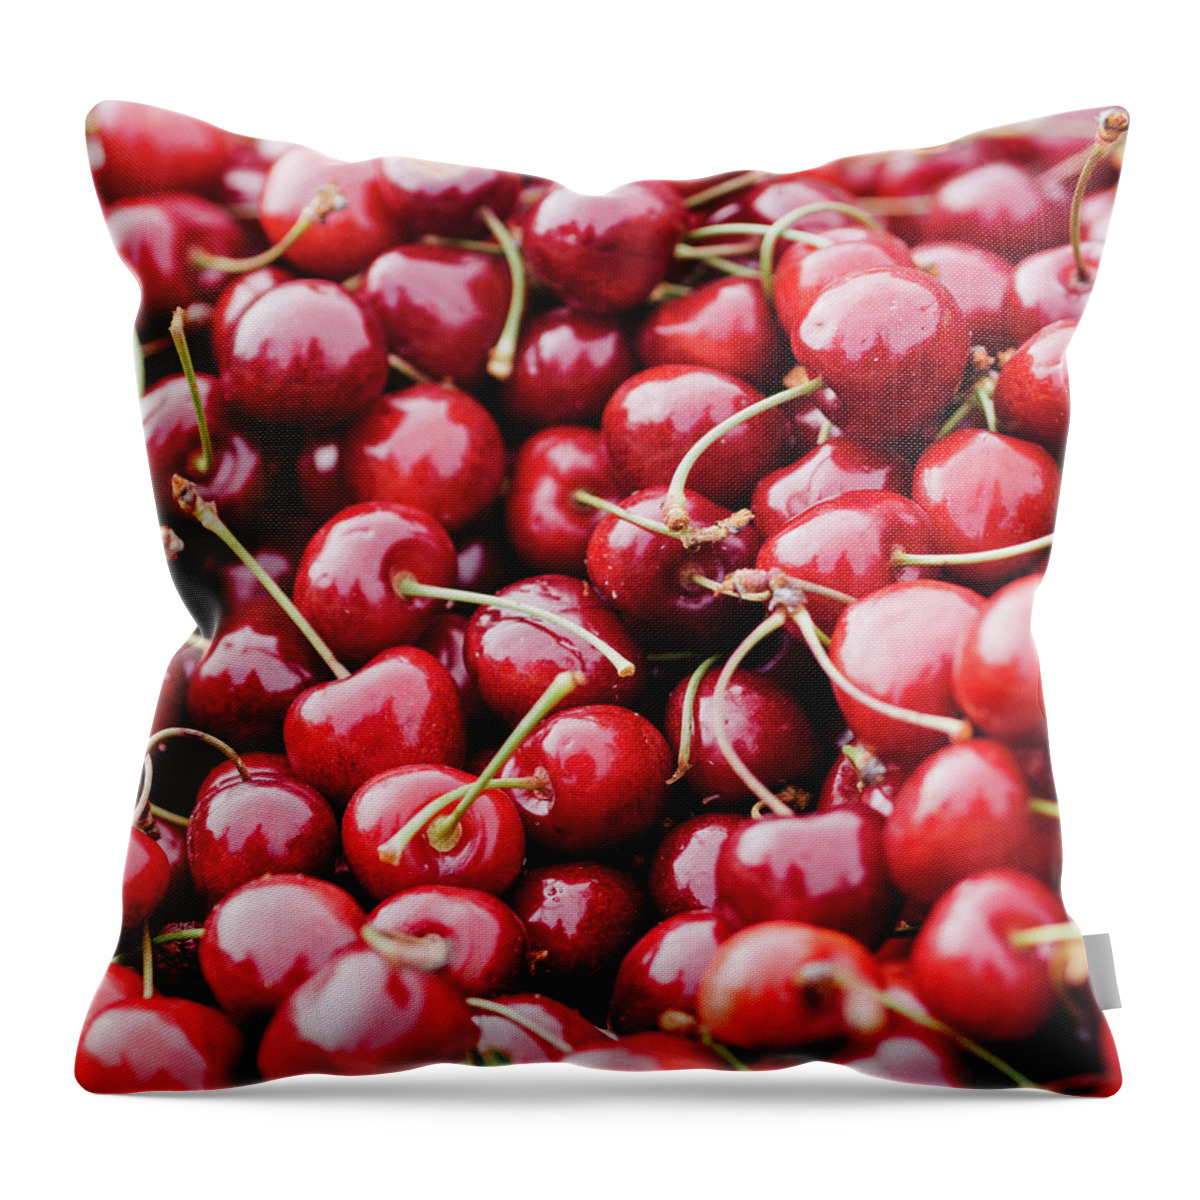 Cherry Throw Pillow featuring the photograph Closeup Of Fresh Cherries by Miemo Penttinen - Miemo.net